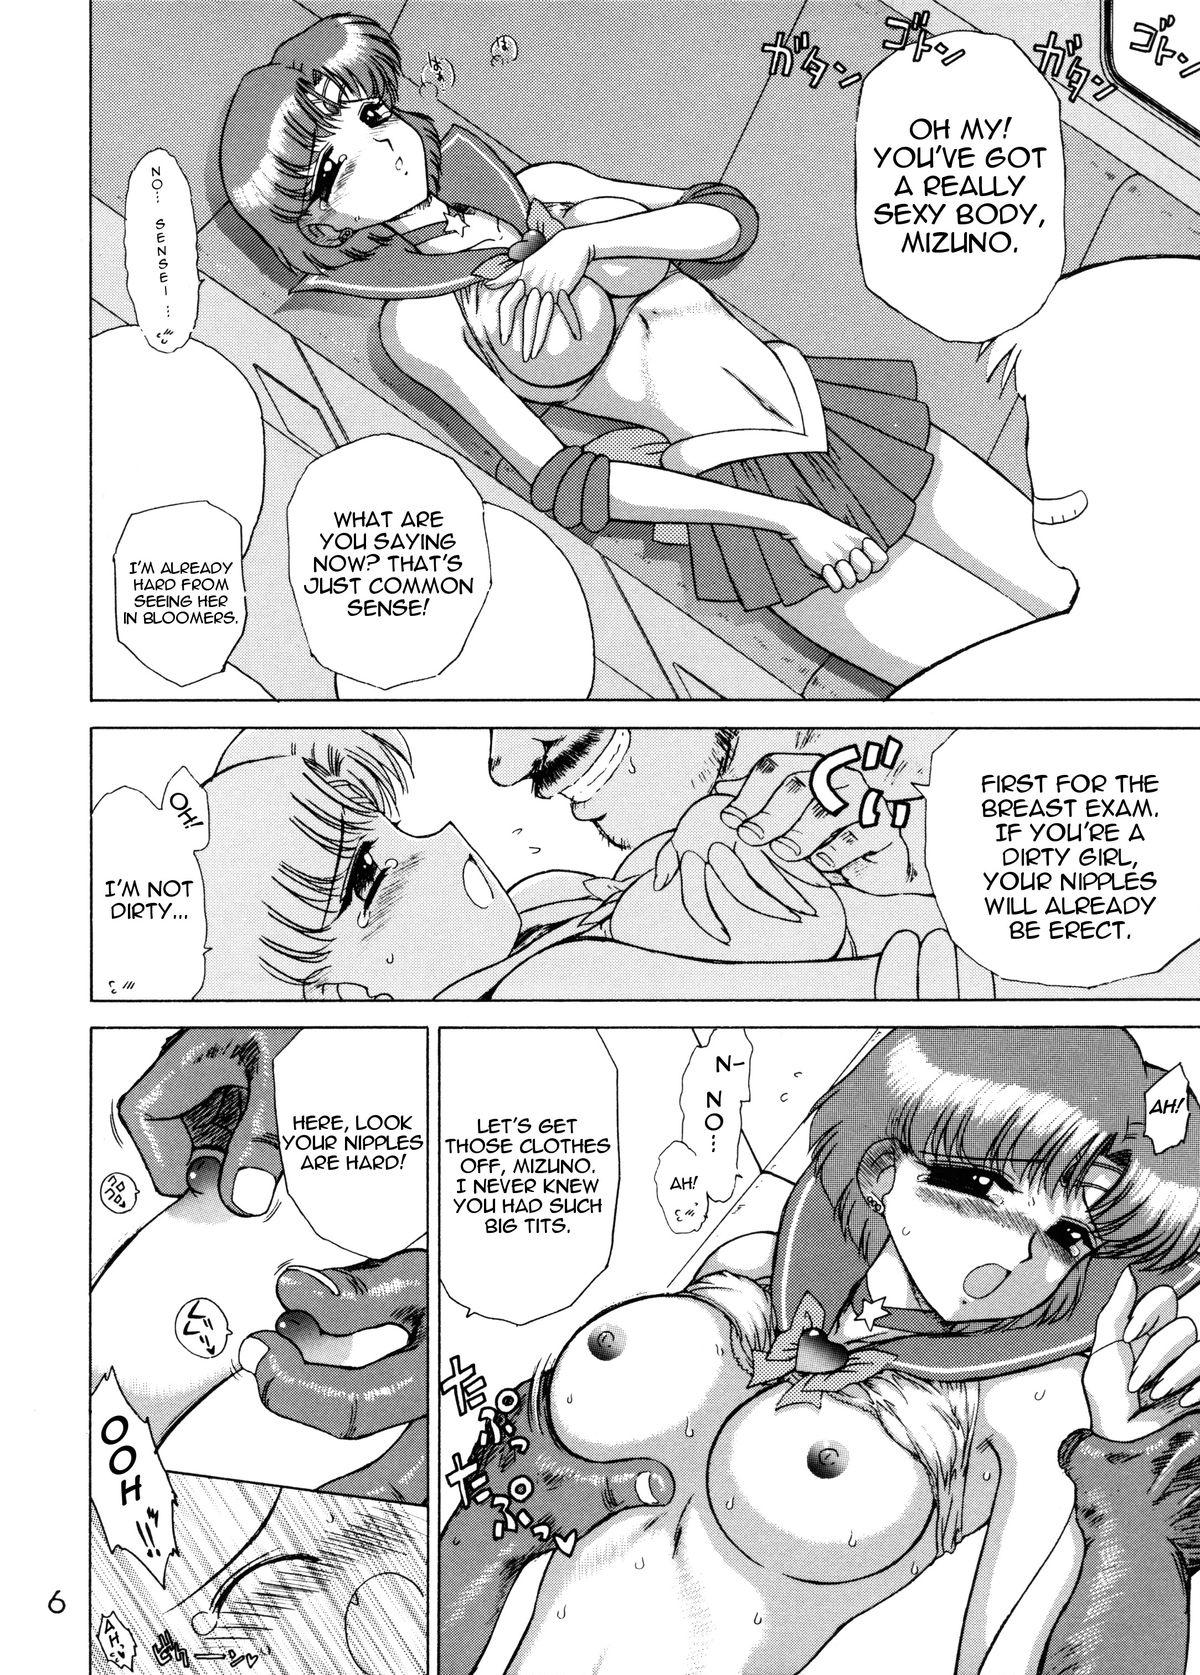 Ametuer Porn Anubis - Sailor moon Tight Pussy - Page 5